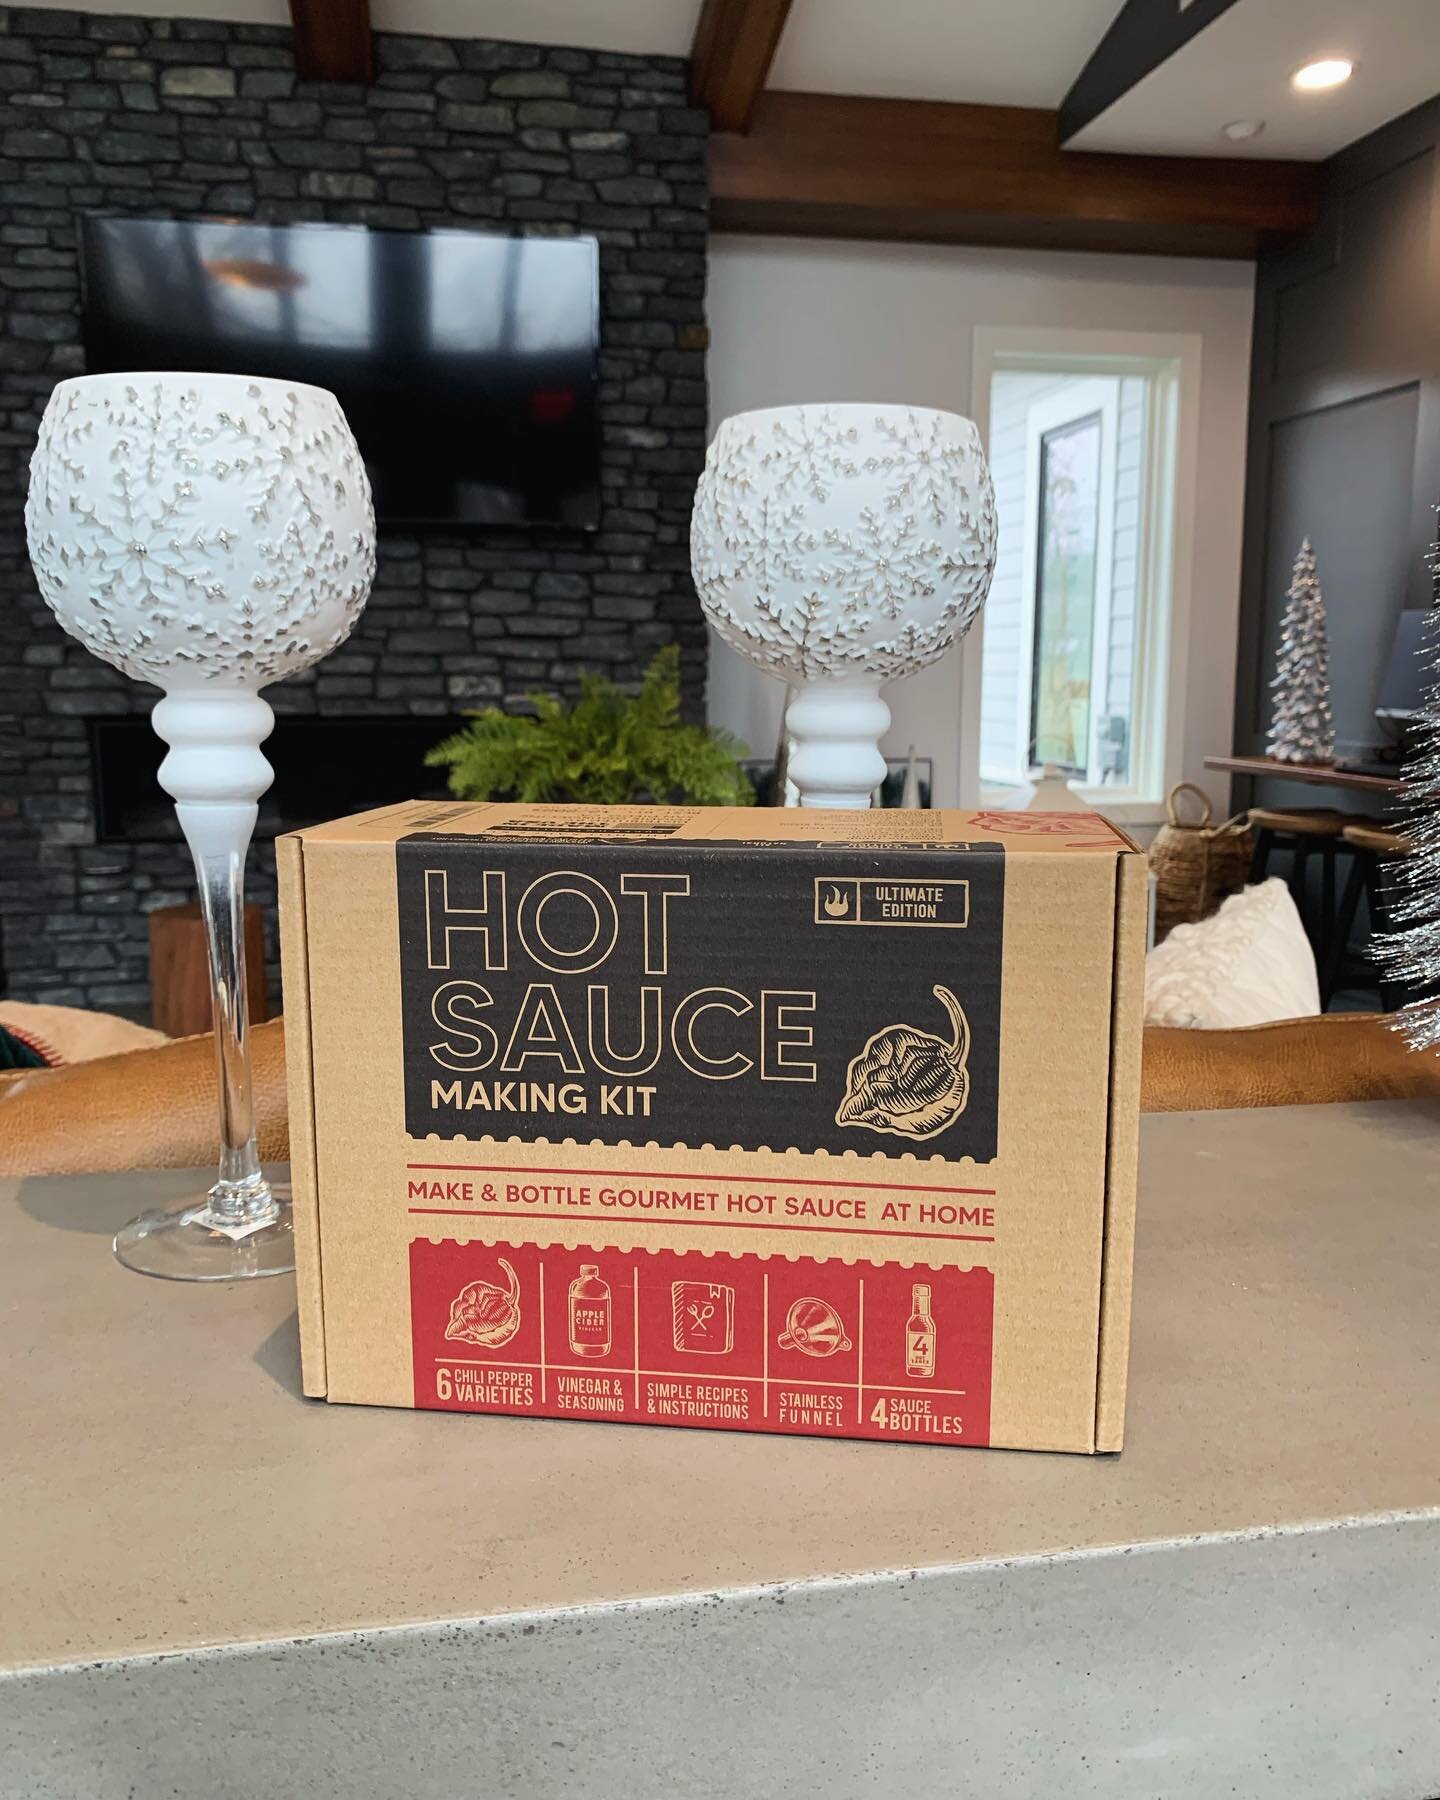 Hot sauce anyone?! Welcome back to Win-it-Wednesday with this How Sauce Making kit!! 

How to enter:

🔥 Like this post
🔥Tell us your favorite Hot sauce FLAVOR!! (Such as, cayenne Garlic.. Chili Lime, etc)

#hotsauce #spicy #flatsatdouglas #toledooh